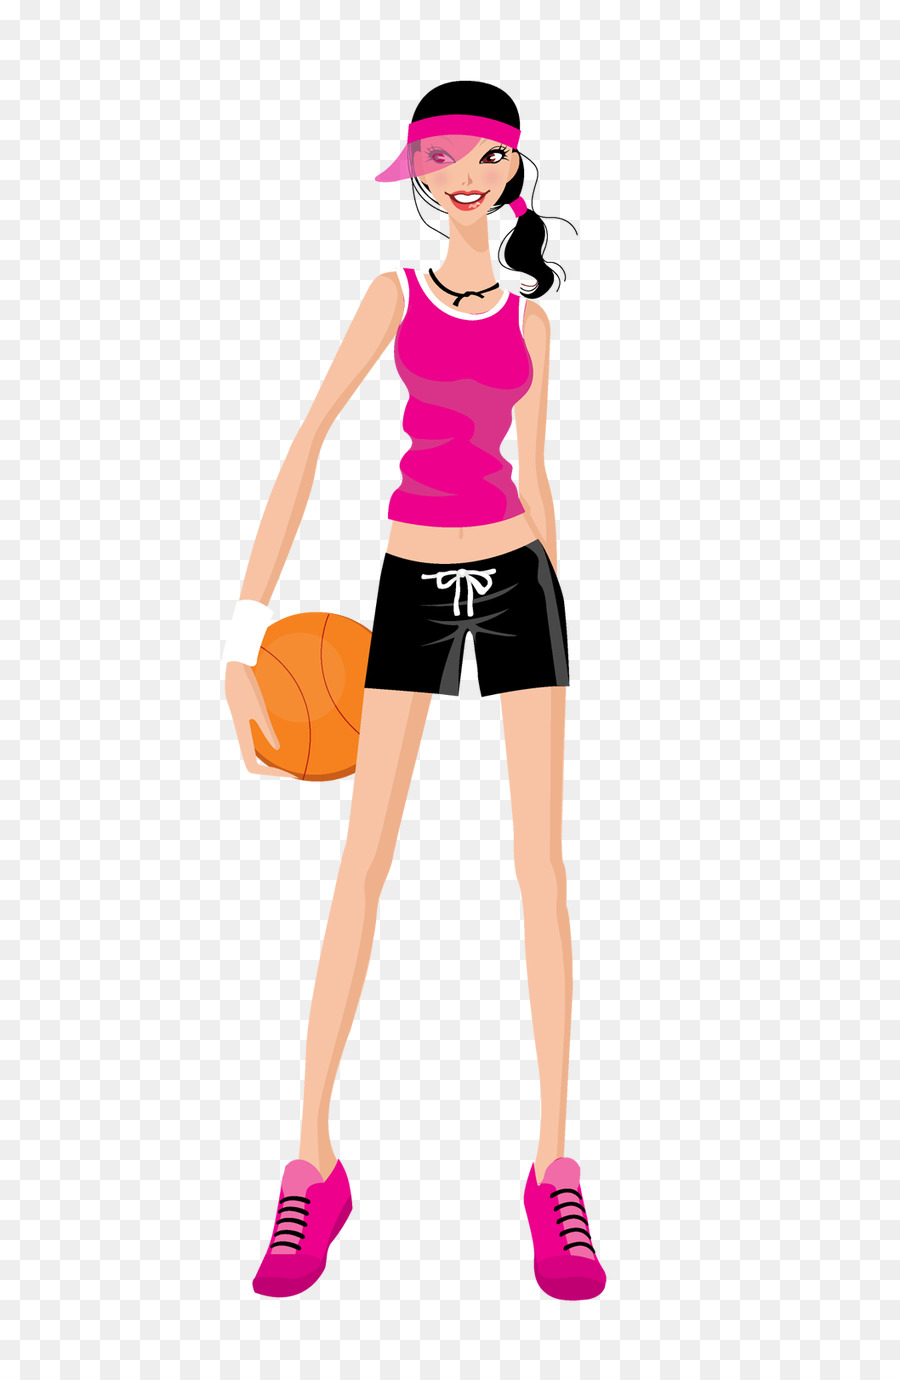 Cartoon Drawing Silhouette Illustration - Fashion Girls Basketball png download - 650*1361 - Free Transparent  png Download.